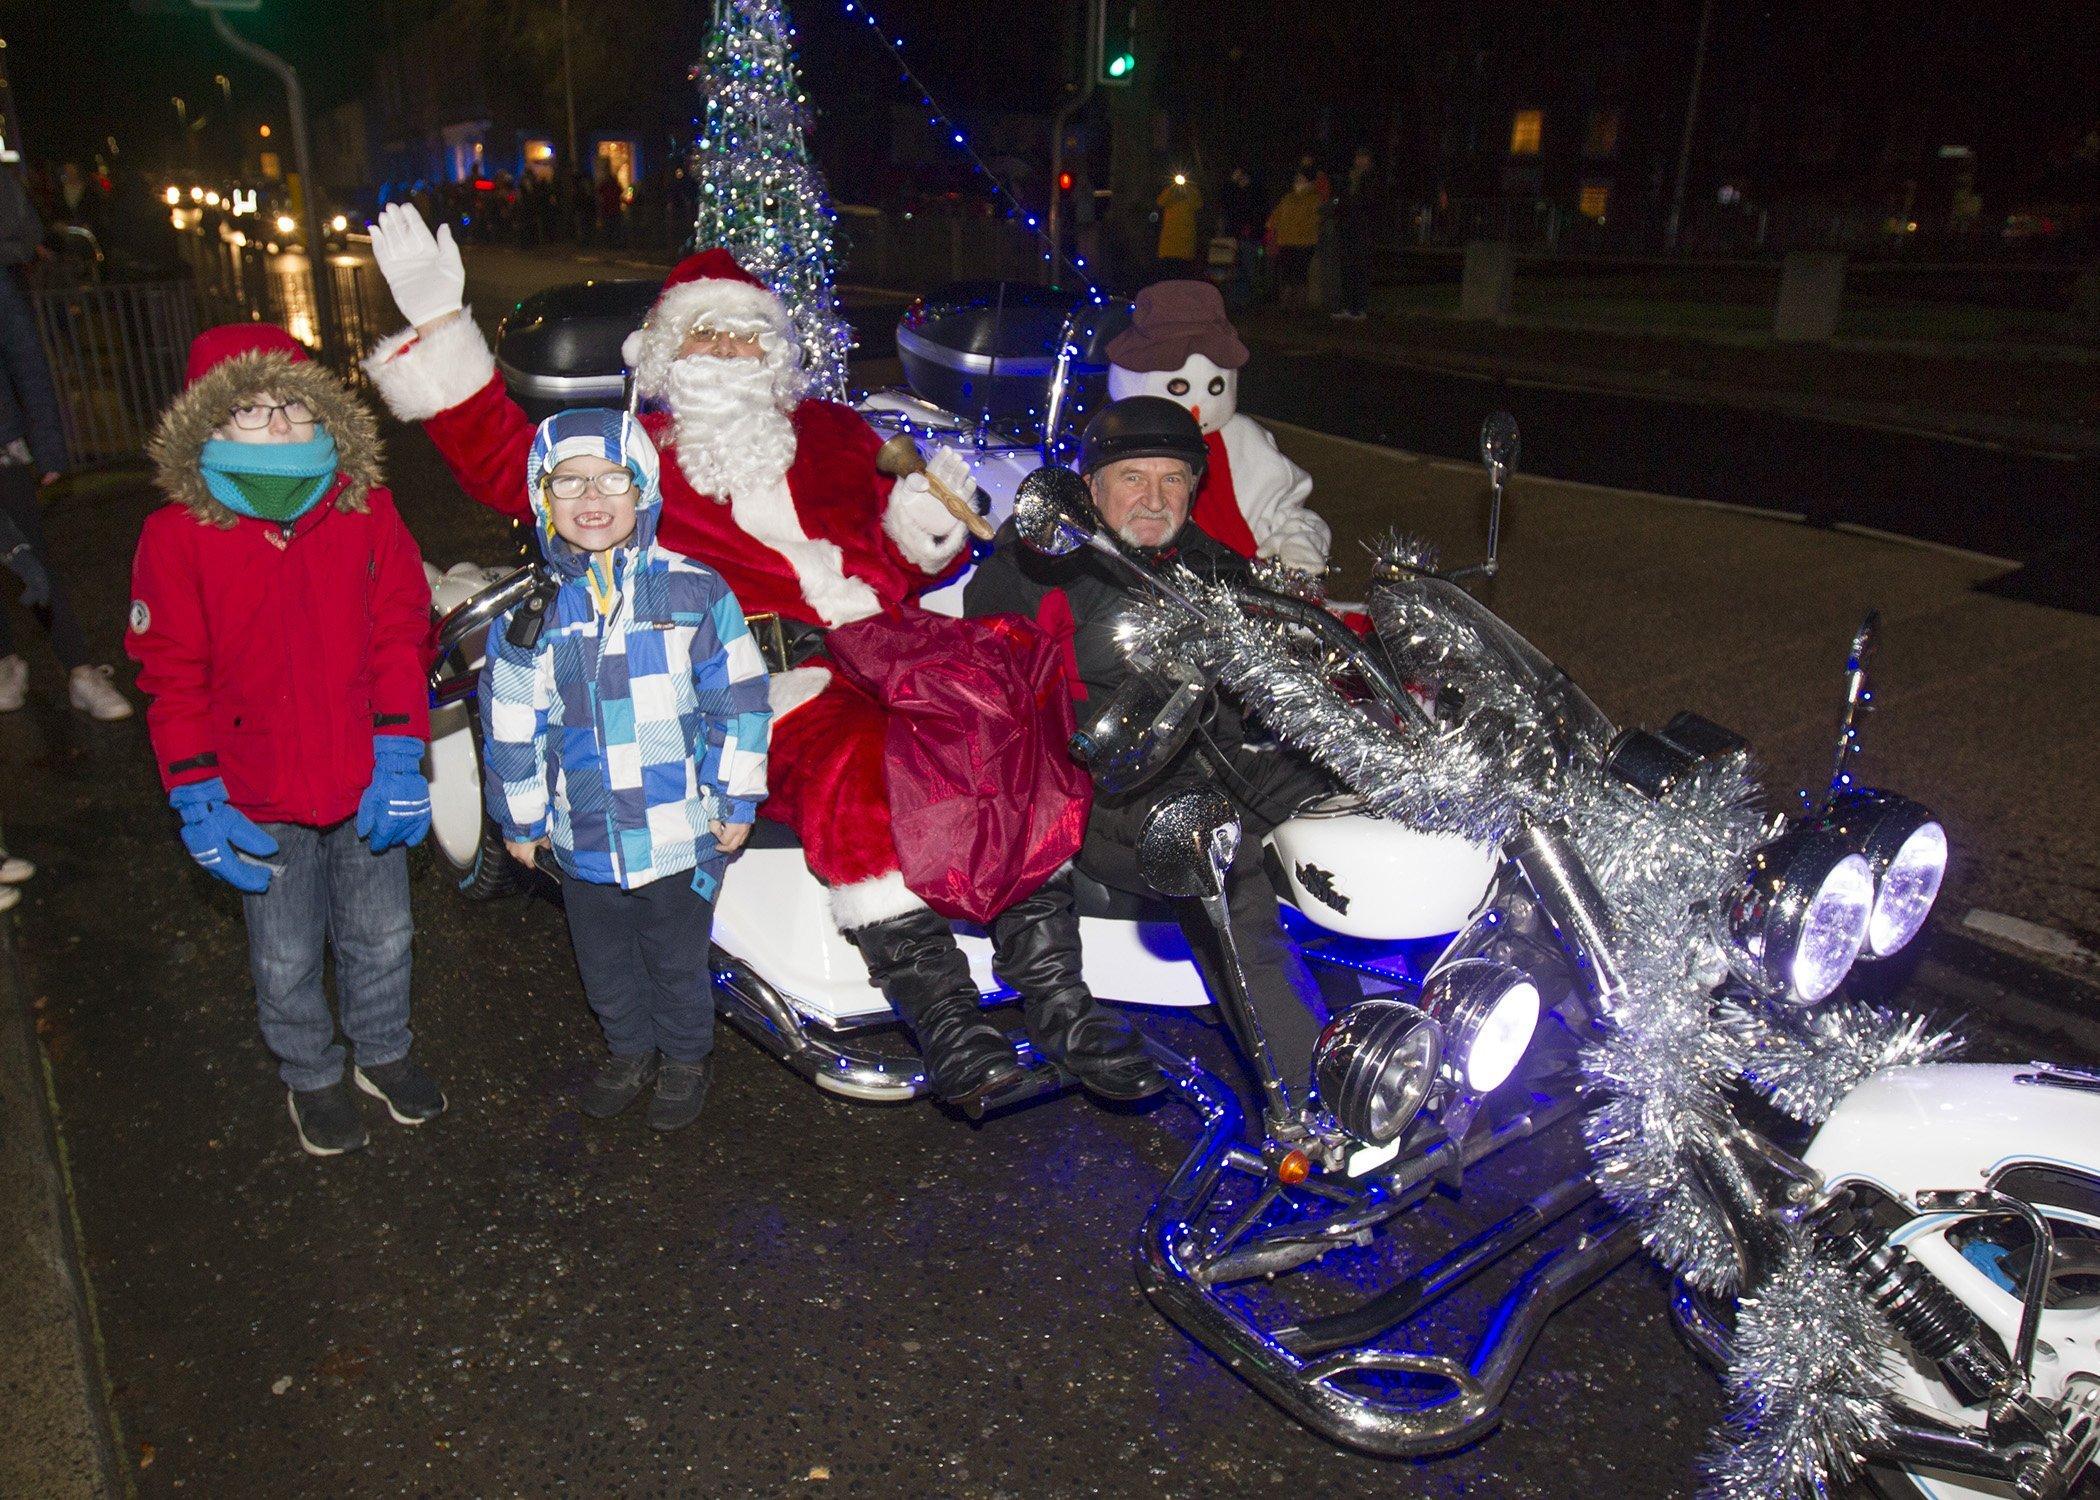 Leland and Caiden Sim from Hawick get to meet Santa as he arrives in style at Earlston